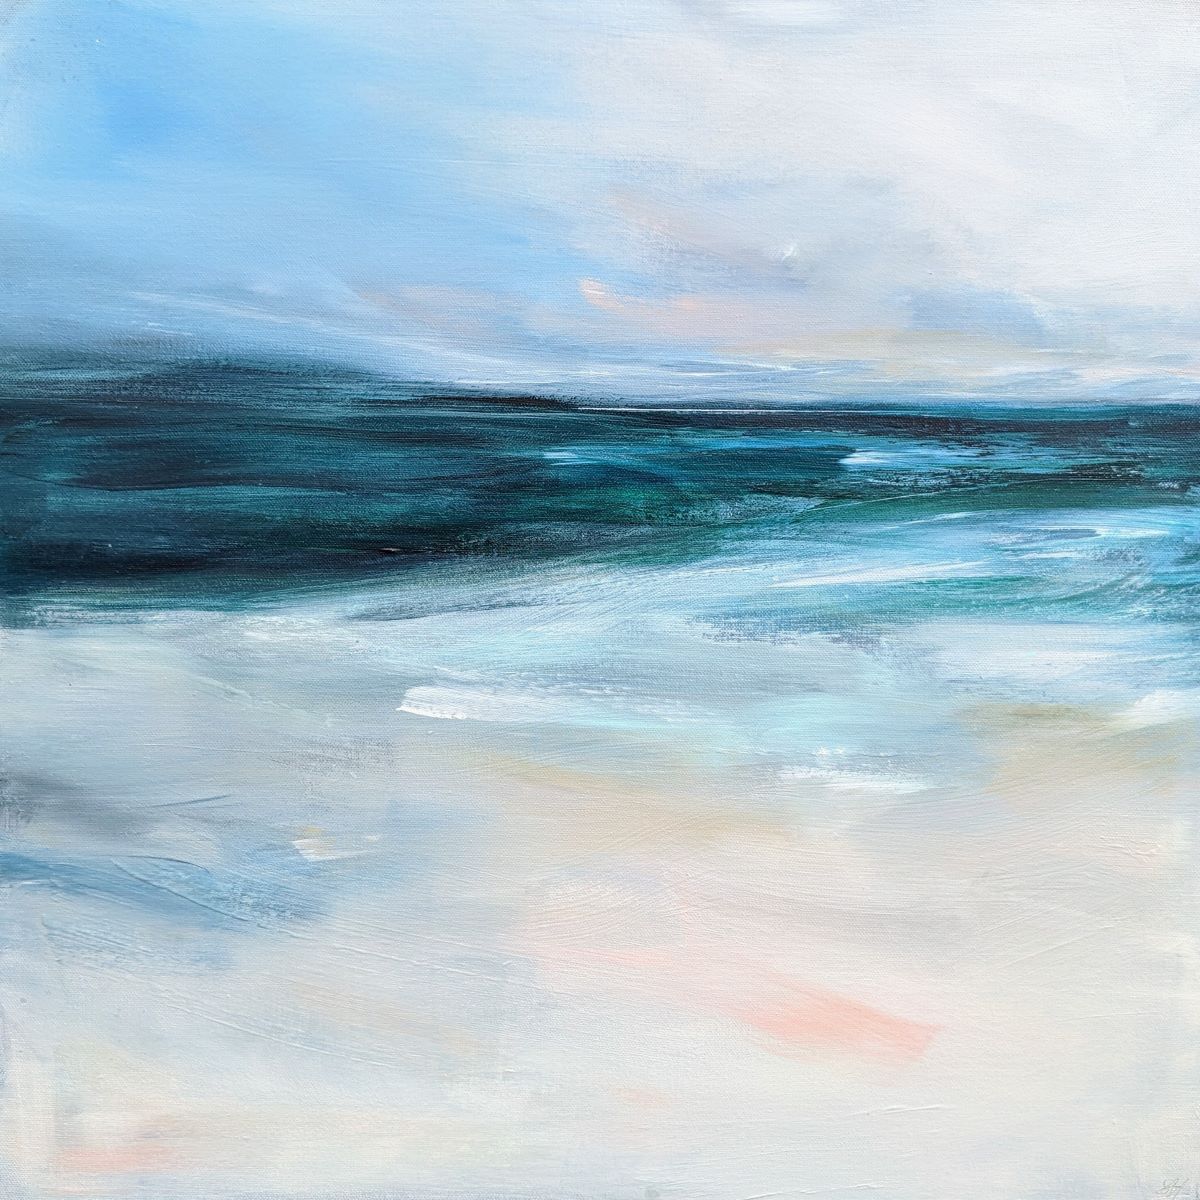 'Sounds of the Sea I' by artist Shona Harcus